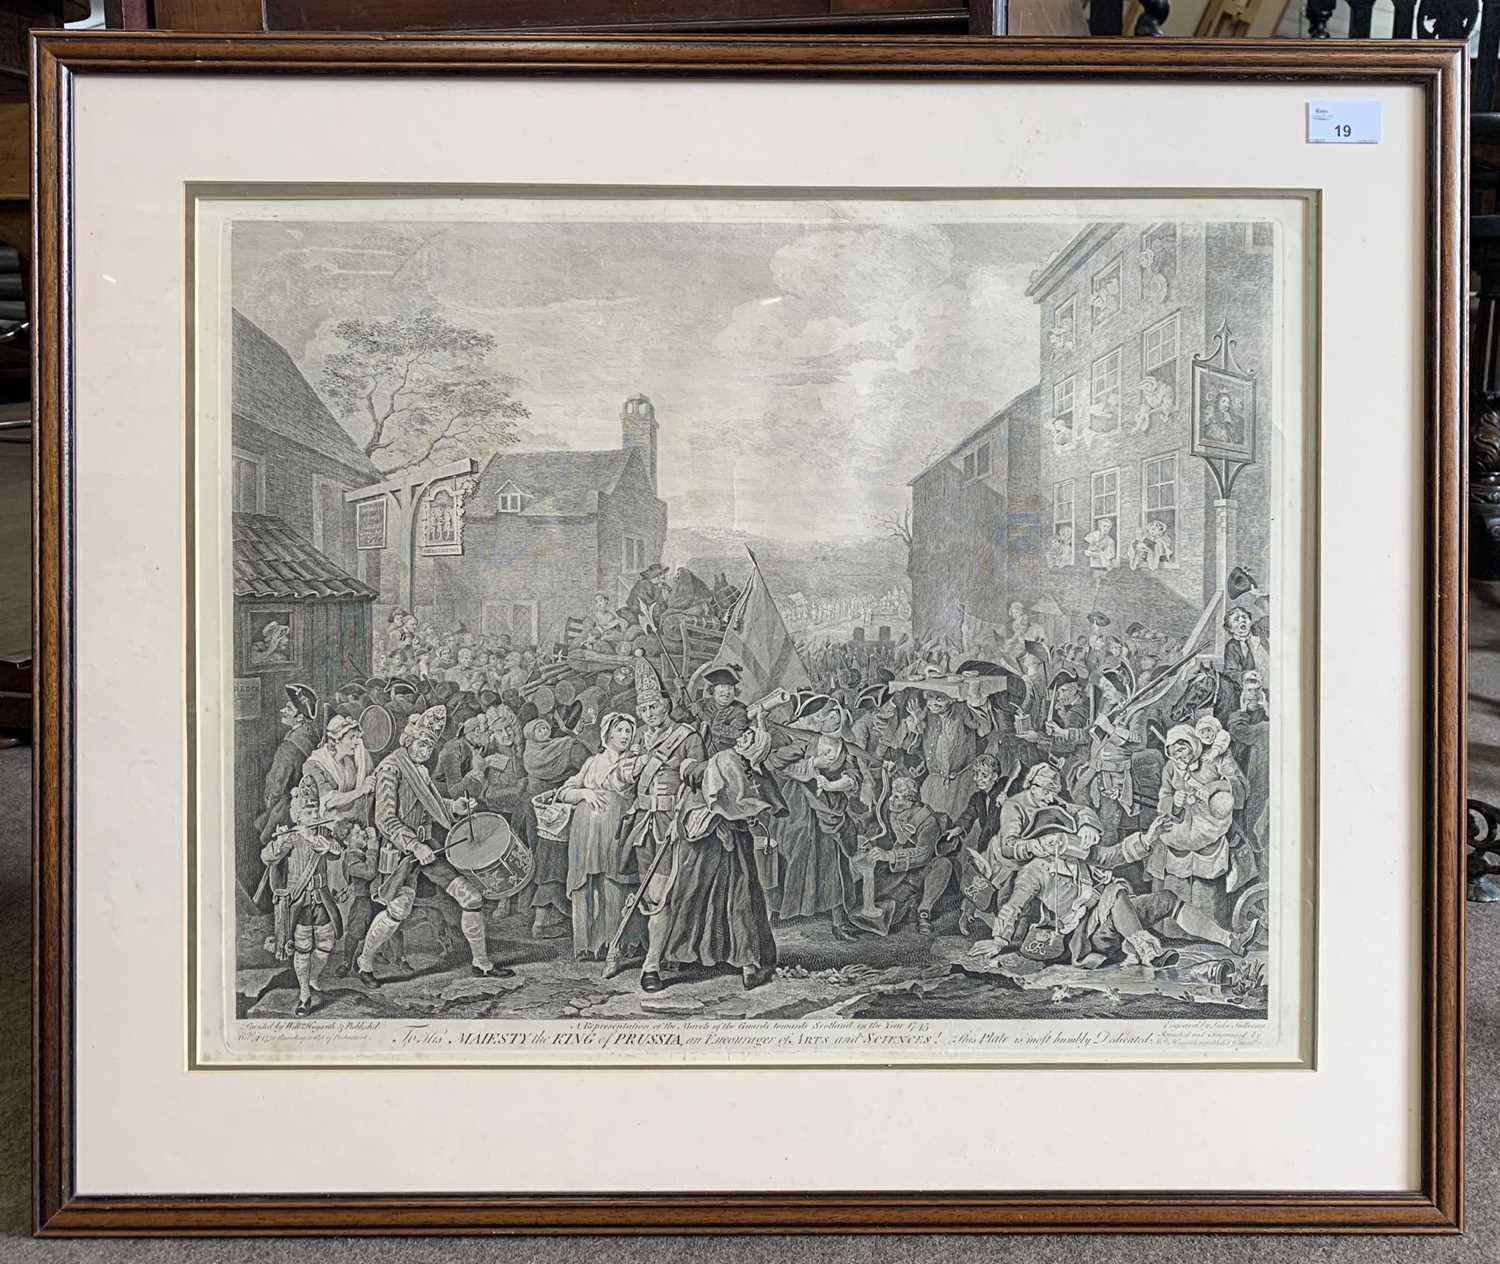 Luke Sullivan RA (1705-1771) After William Hogarth, 'A Representation of the March of the Guards